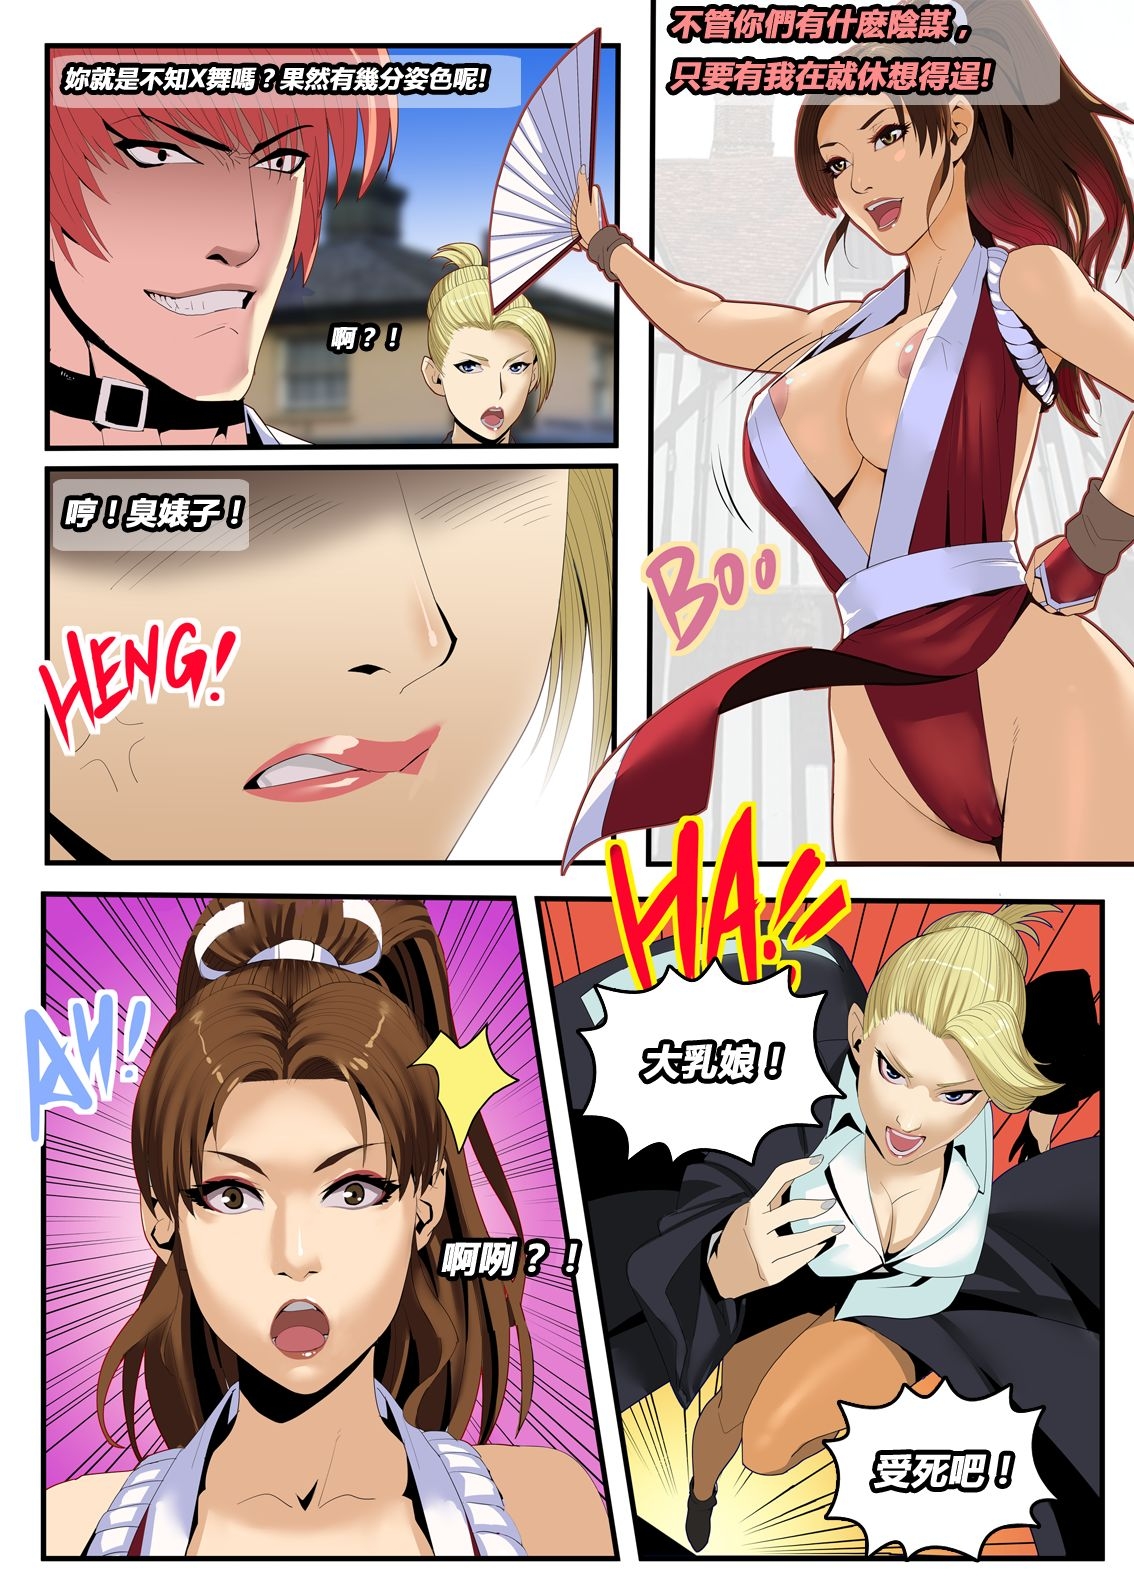 [chunlieater] The Lust of Mai Shiranui (King of Fighters) [Chinese] 5